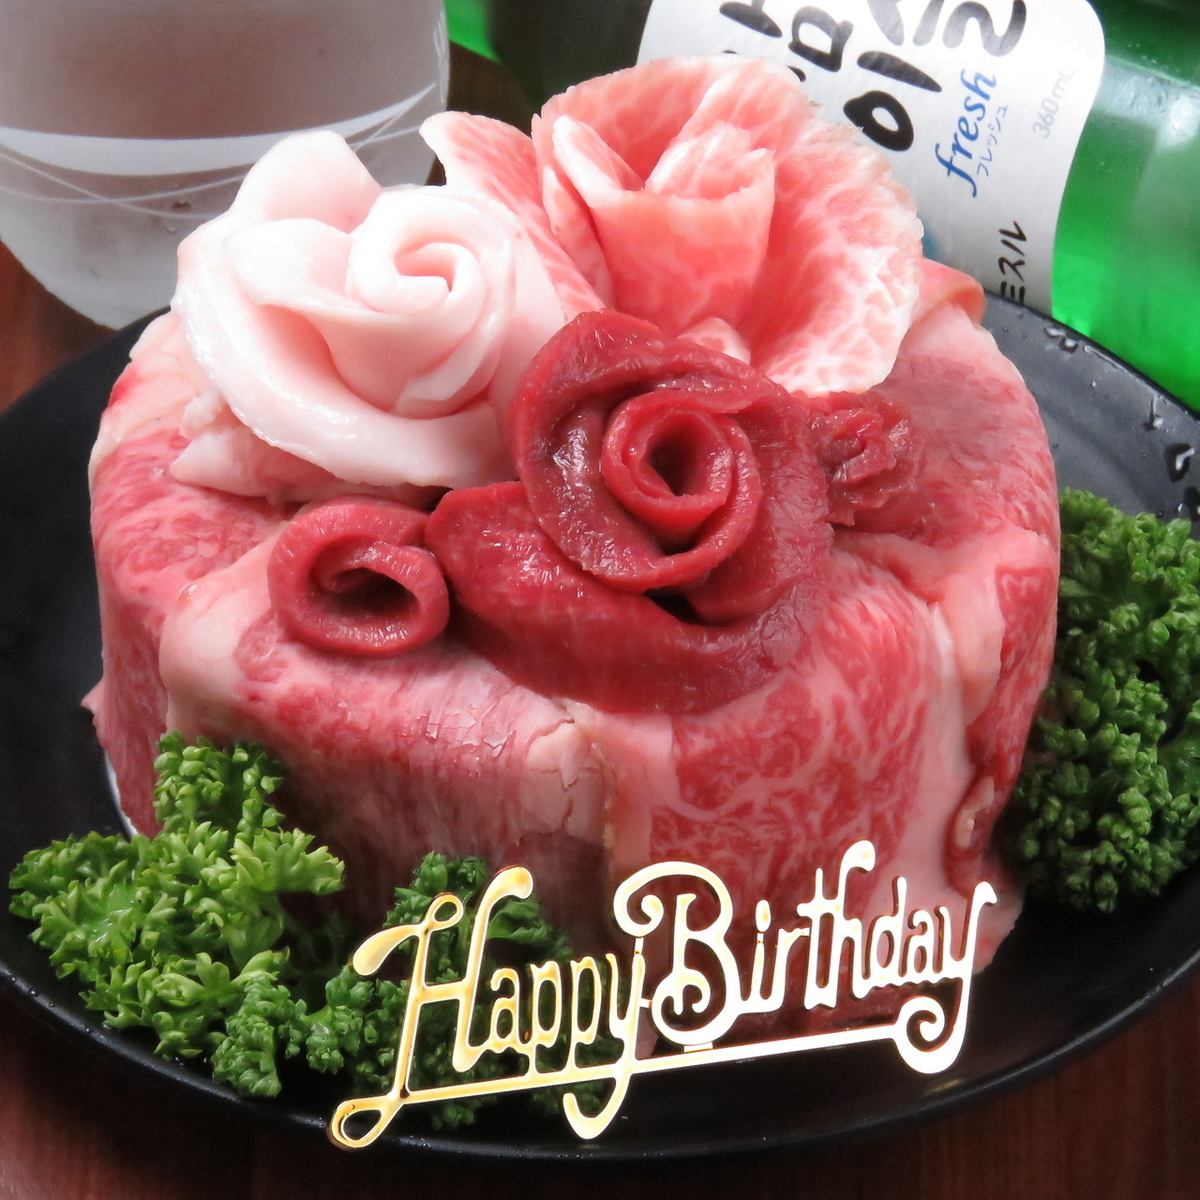 Meat cake☆OK within the all-you-can-eat price♪No additional charge!!